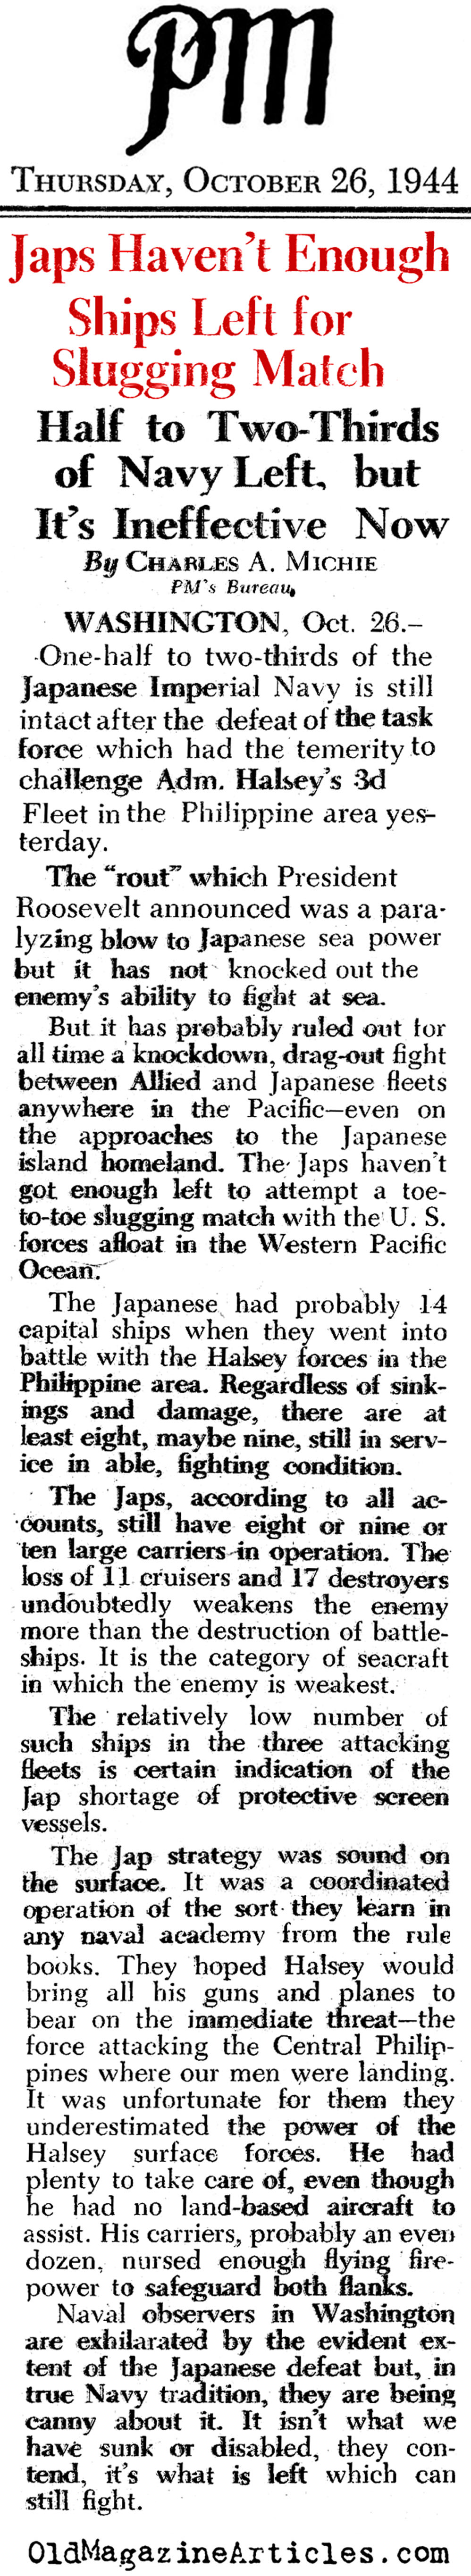 The Japanese Run Out of Ships (PM Tabloid, 1944)